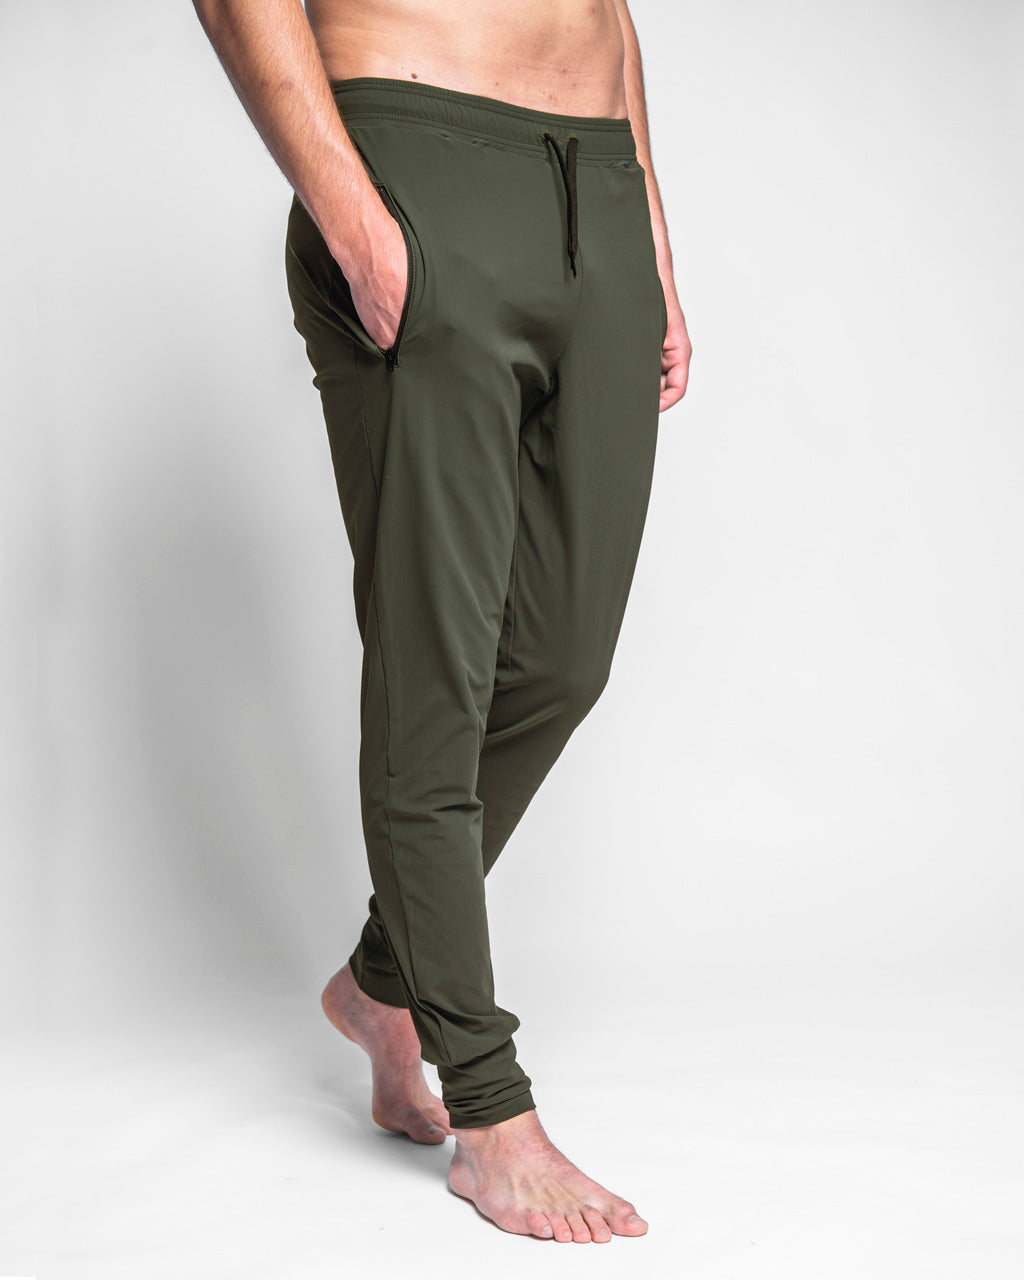 Yed Joggers Men, army